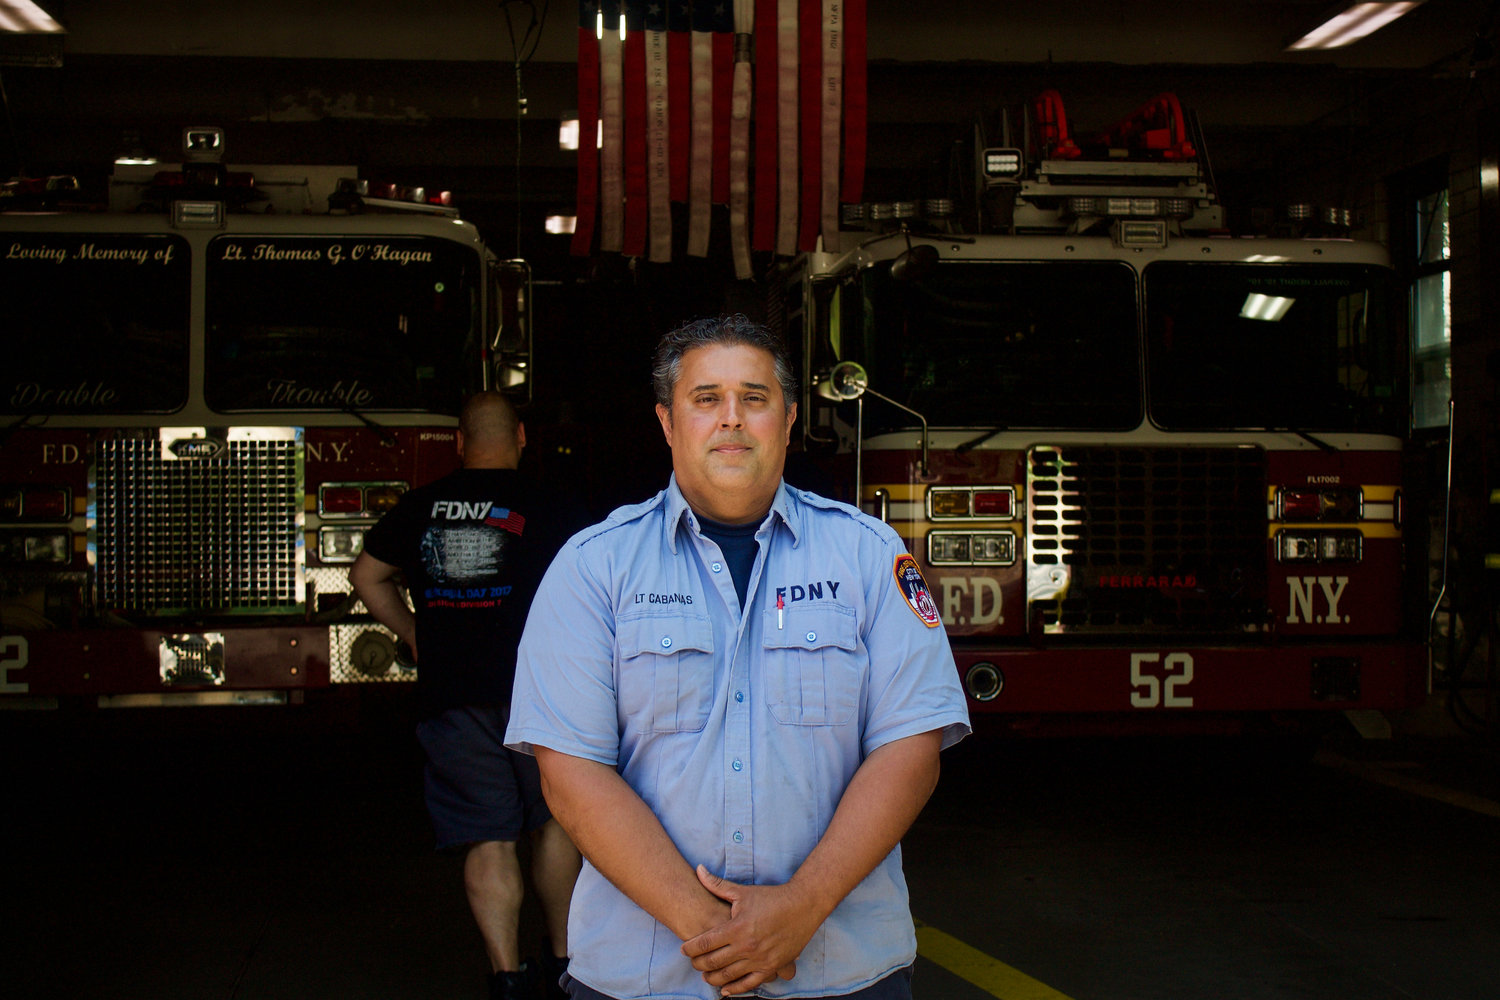 Lt. Gilbert Cabanas led his Ladder 52 crew into a sixth-floor apartment on West 240th Street on Nov. 4, 2019. He suffered second-degree burns to his hands and face while saving a woman’s life. That earned Cabanas the 2020 Hispanic Society/23rd Street Fire Memorial Medal of Valor for his heroics.